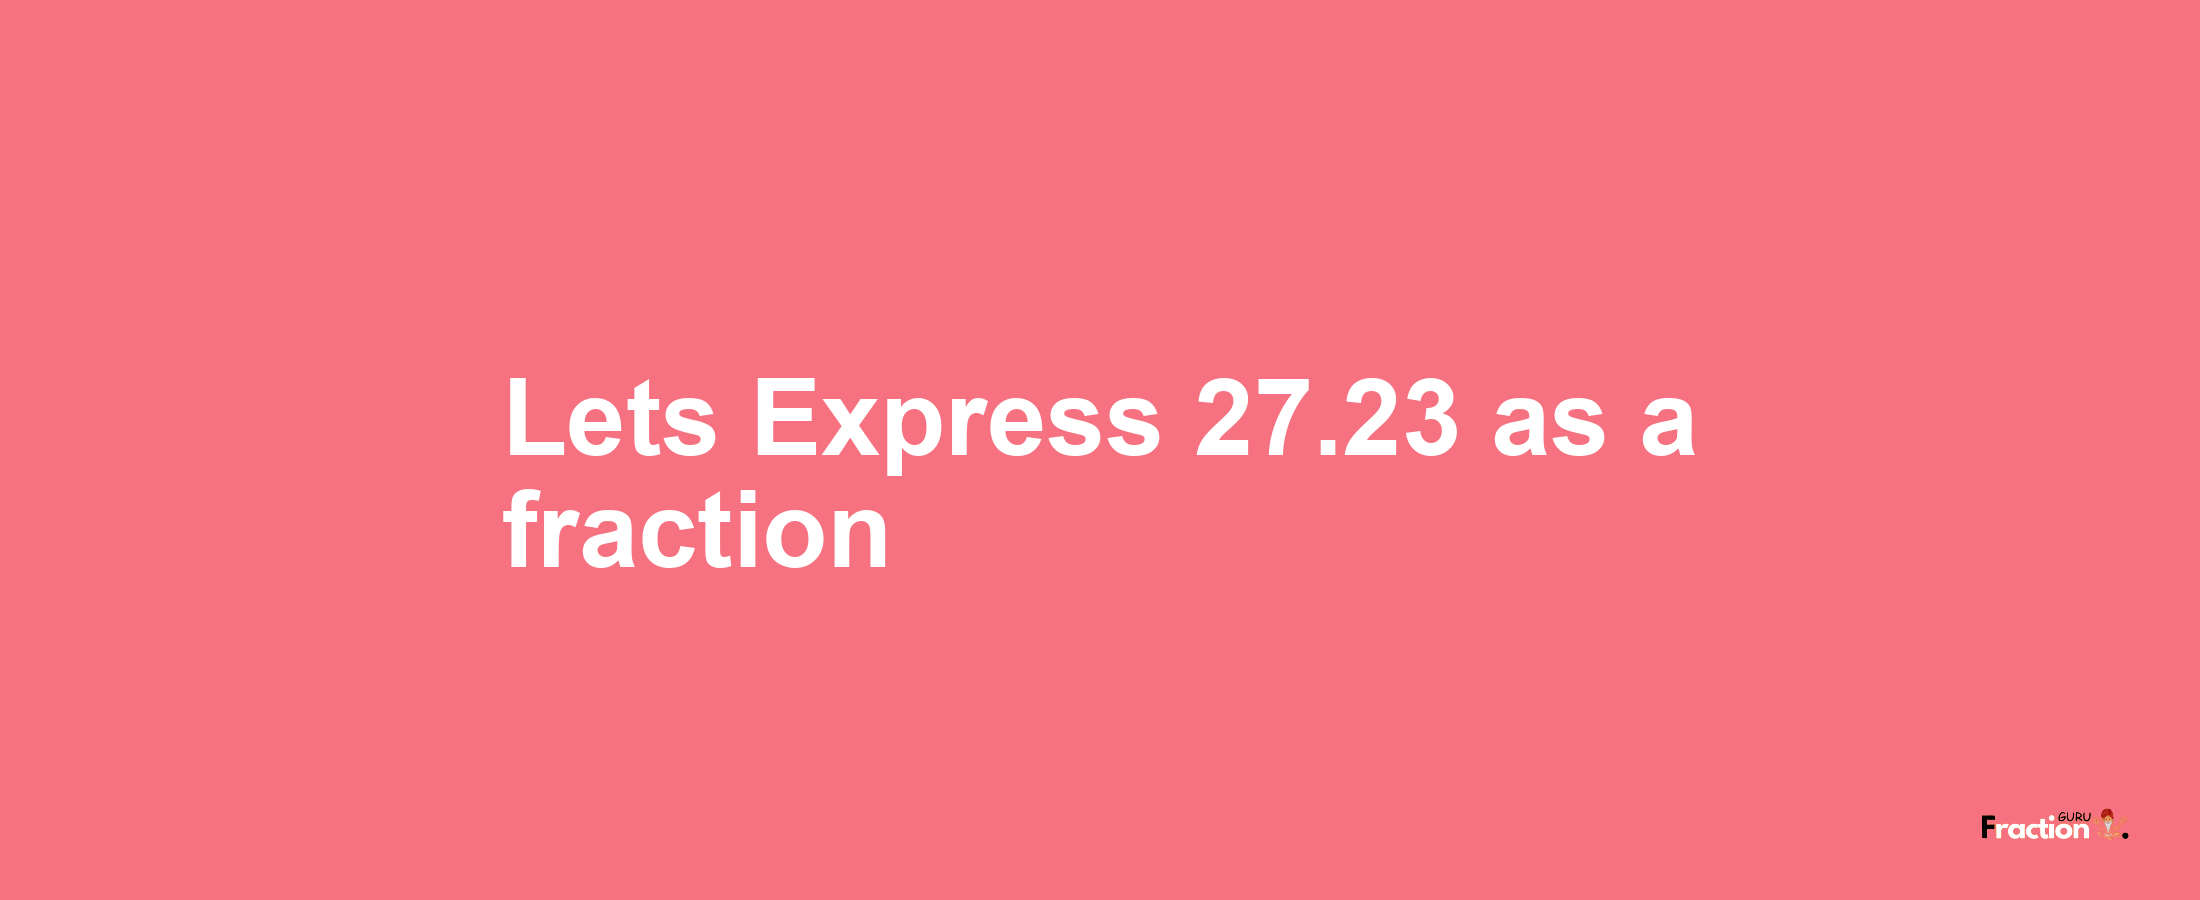 Lets Express 27.23 as afraction